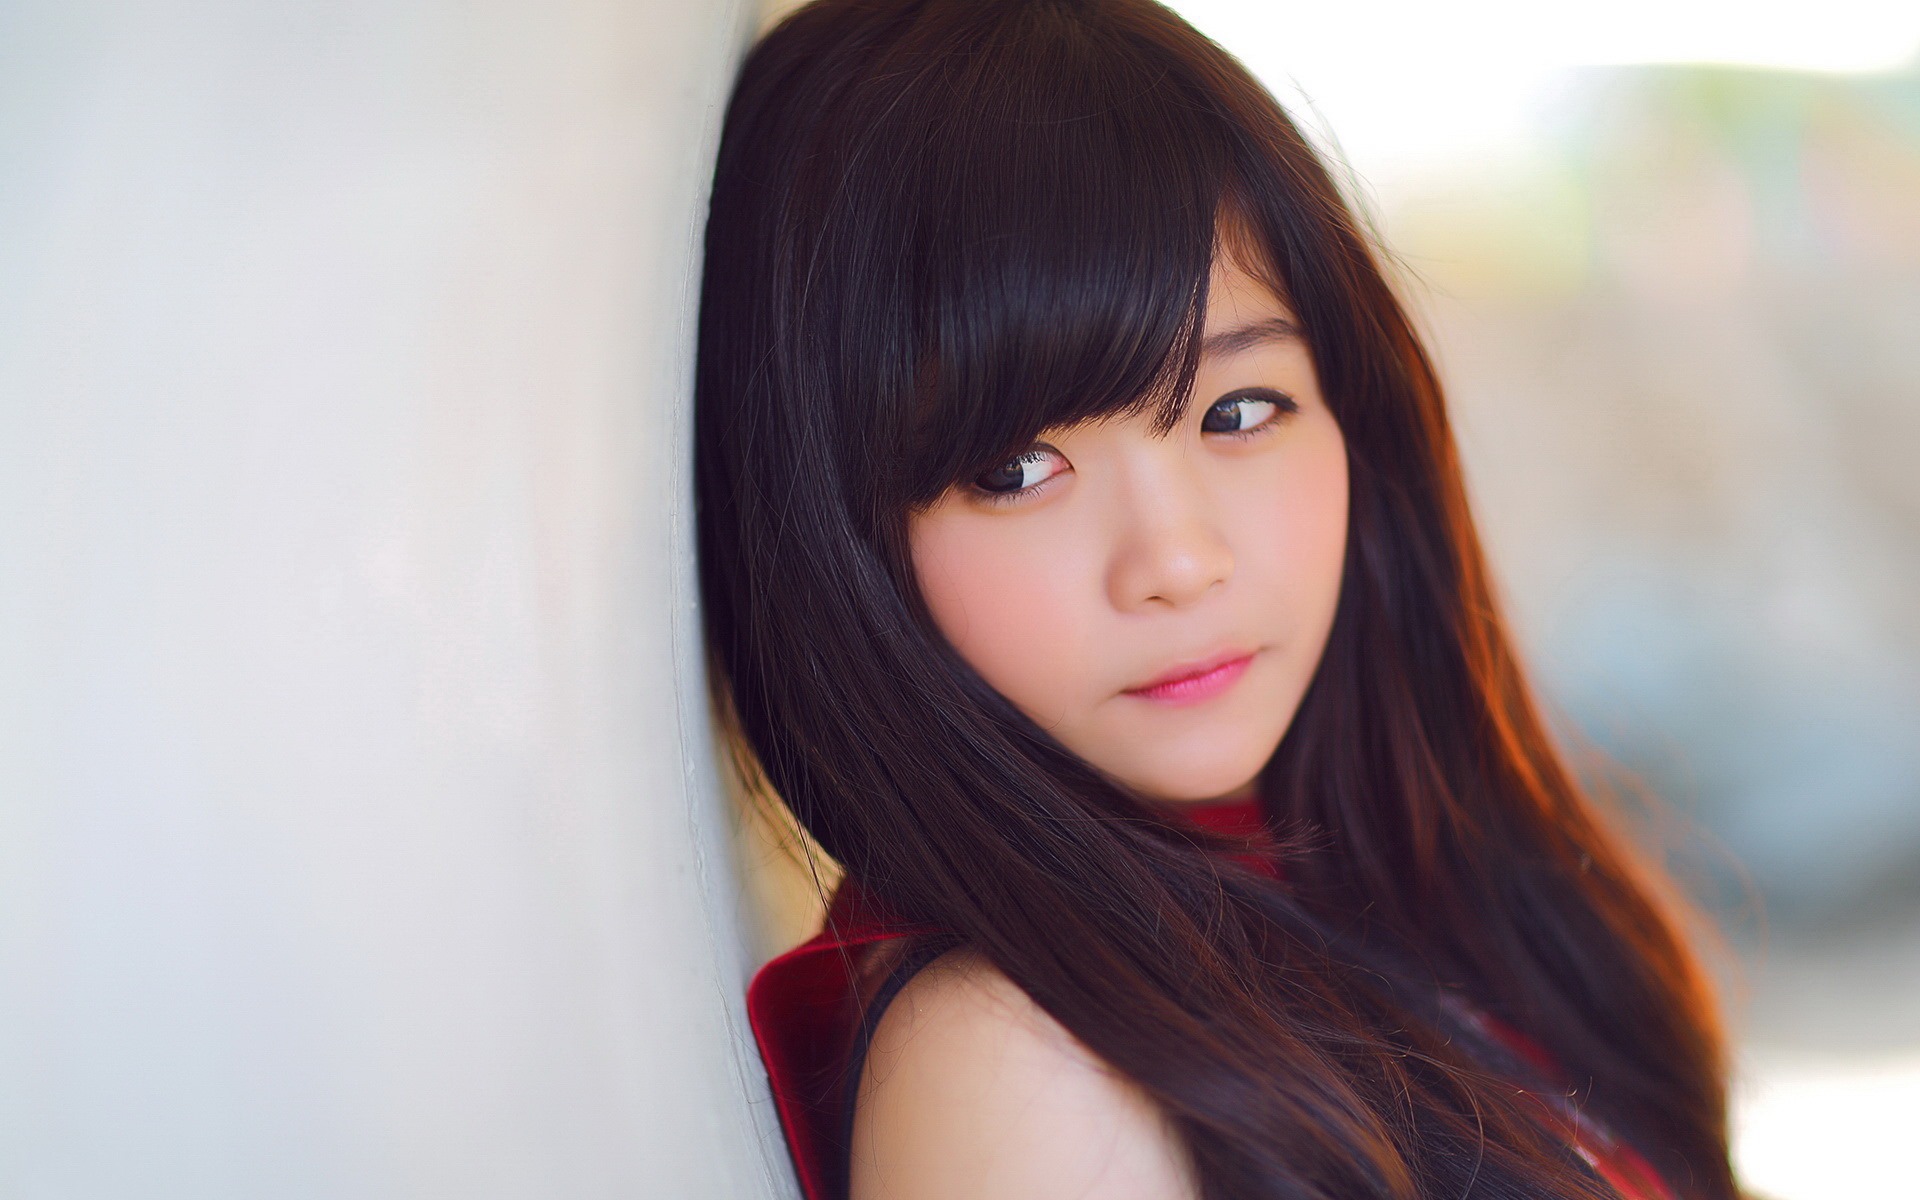 Pure and lovely young Asian girl HD wallpapers collection (1) #19 - 1920x1200